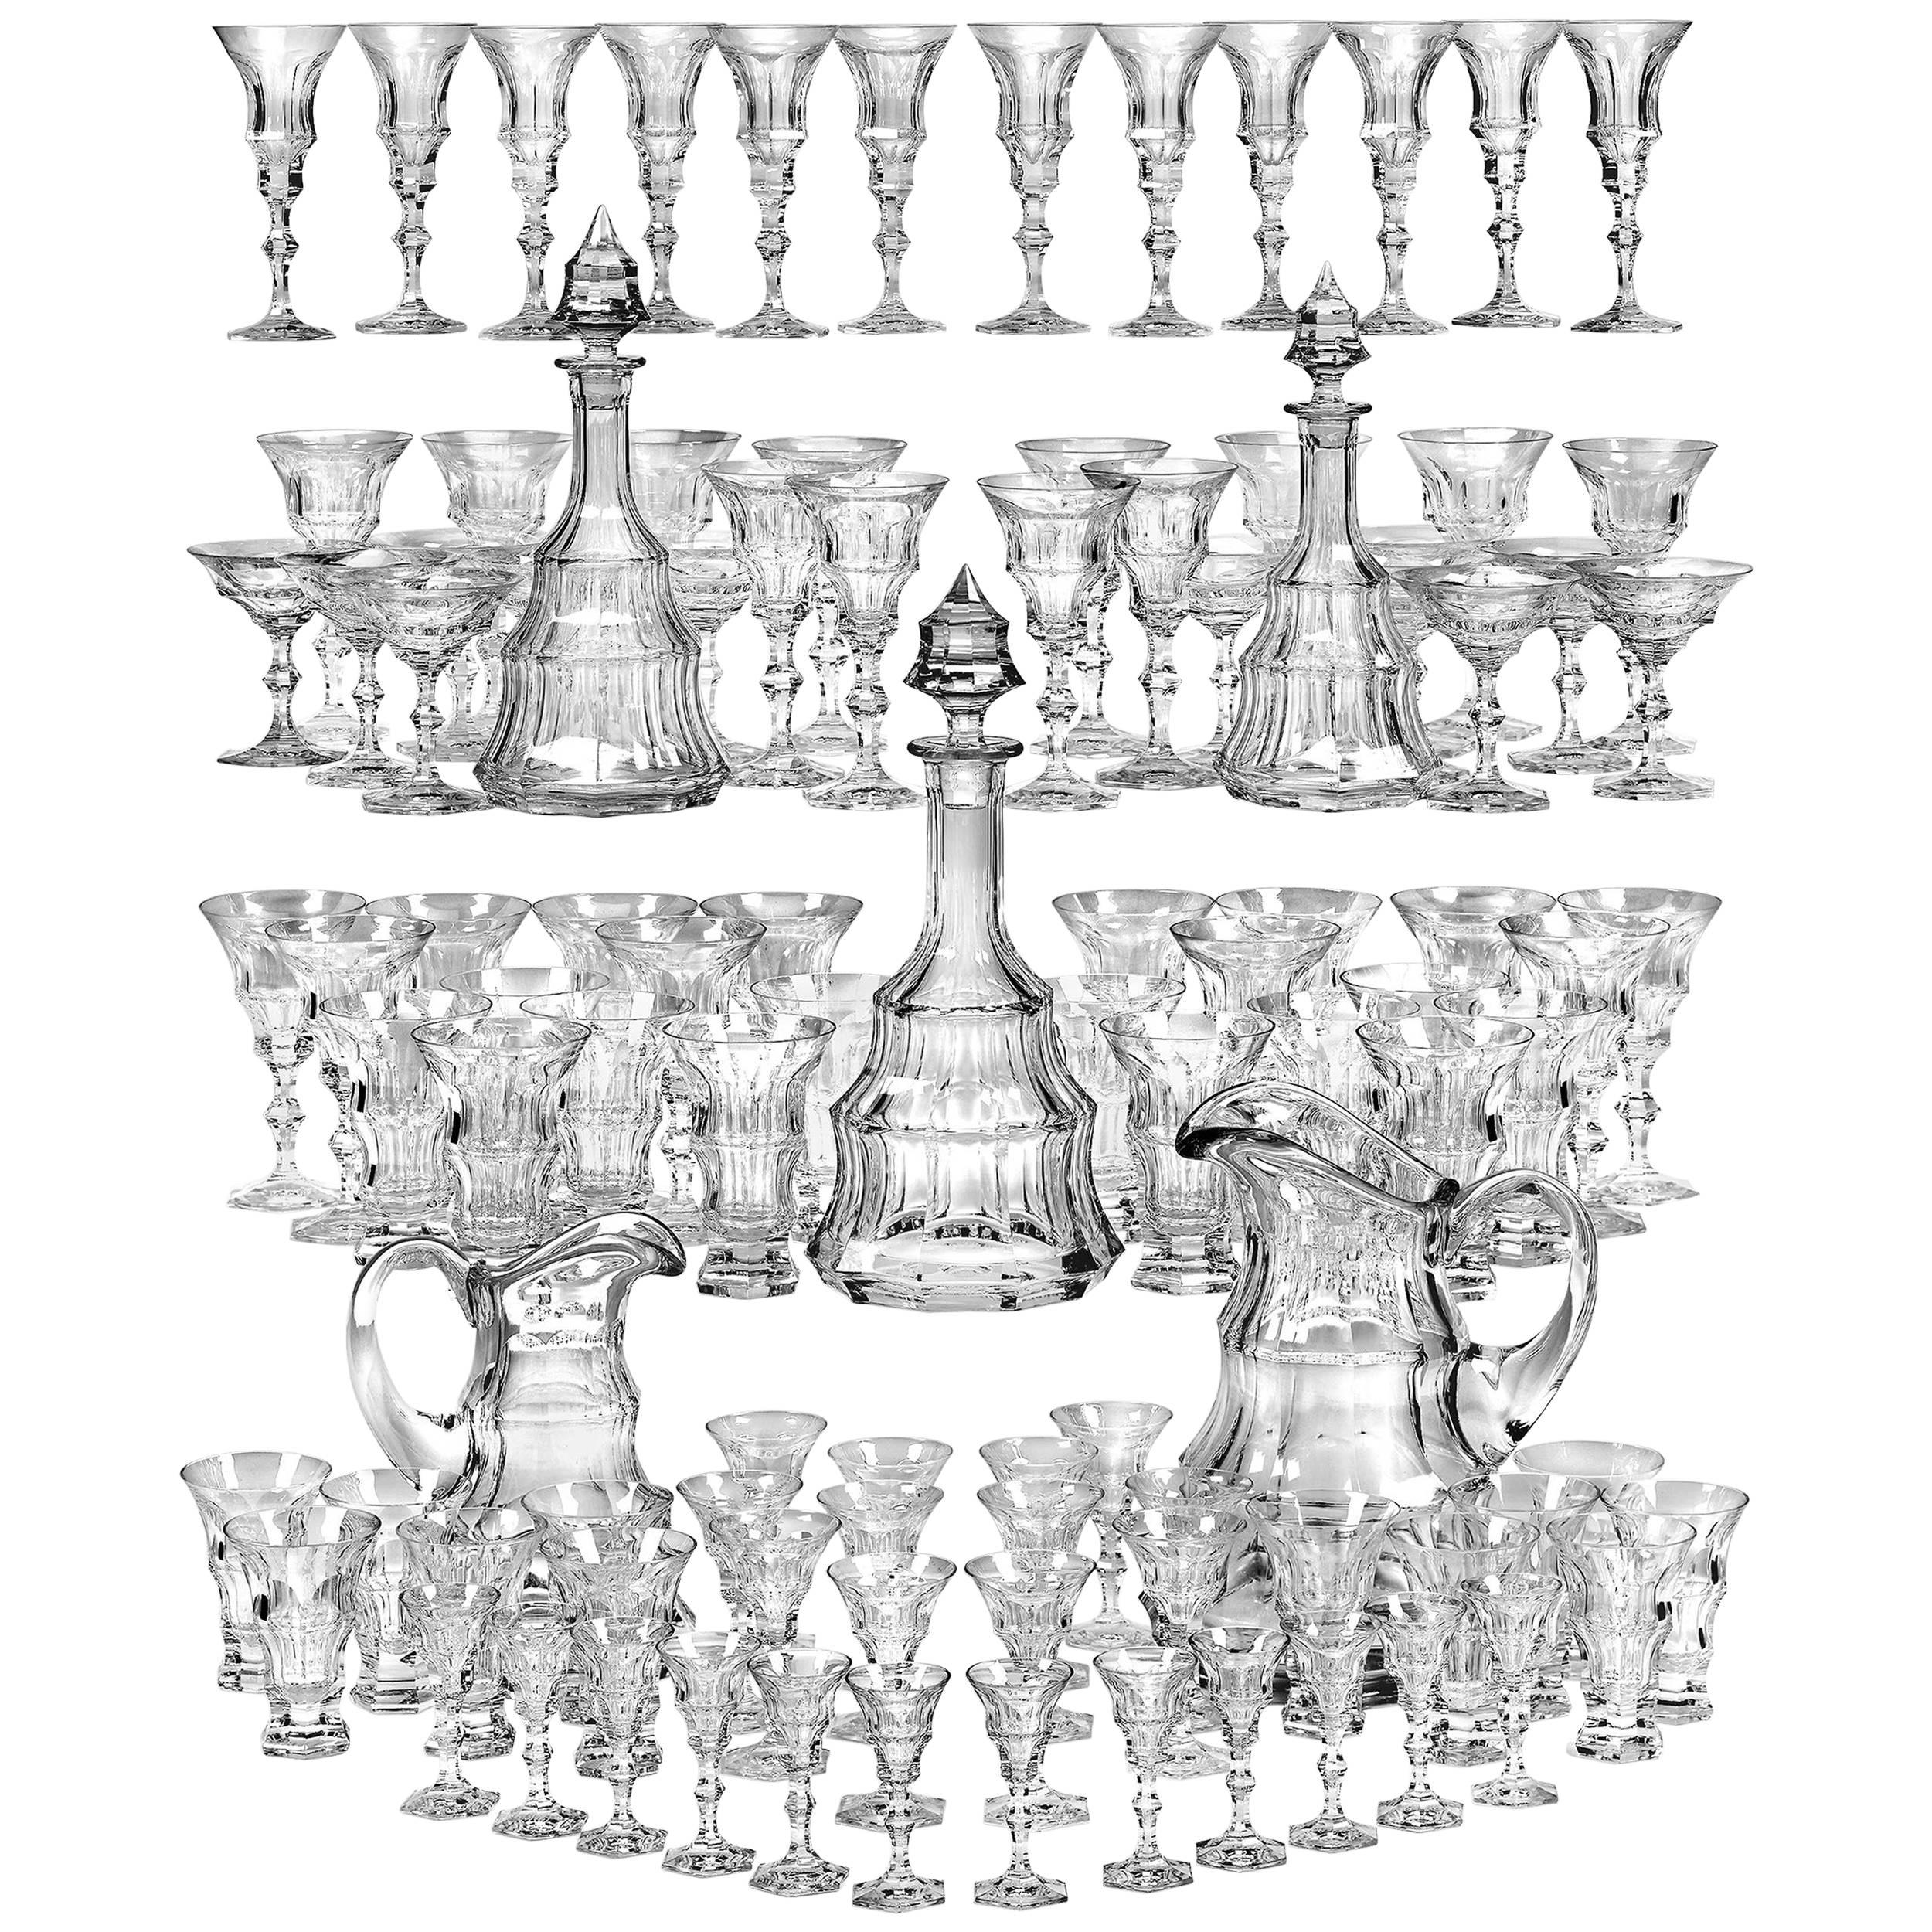 Moser "Diplomat" Crystal Beverage Service 101 Pieces